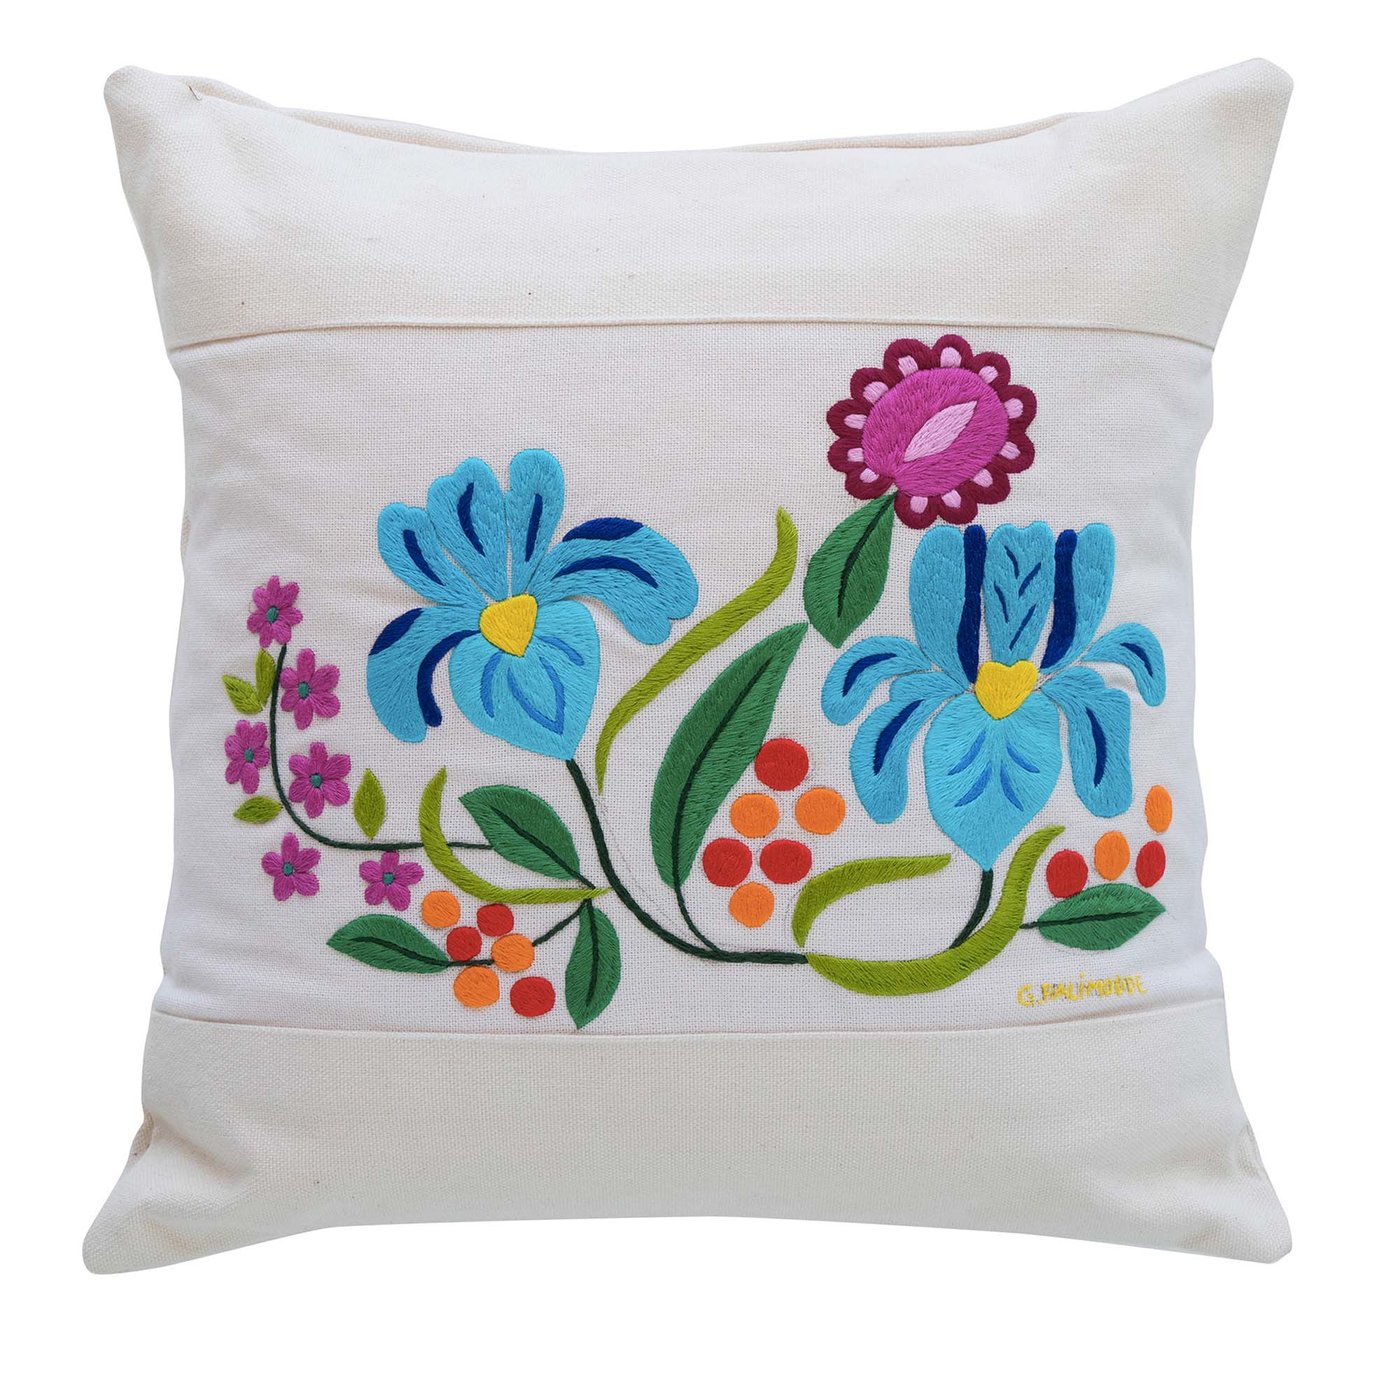 Embroidered Flowers Cushion - Main view